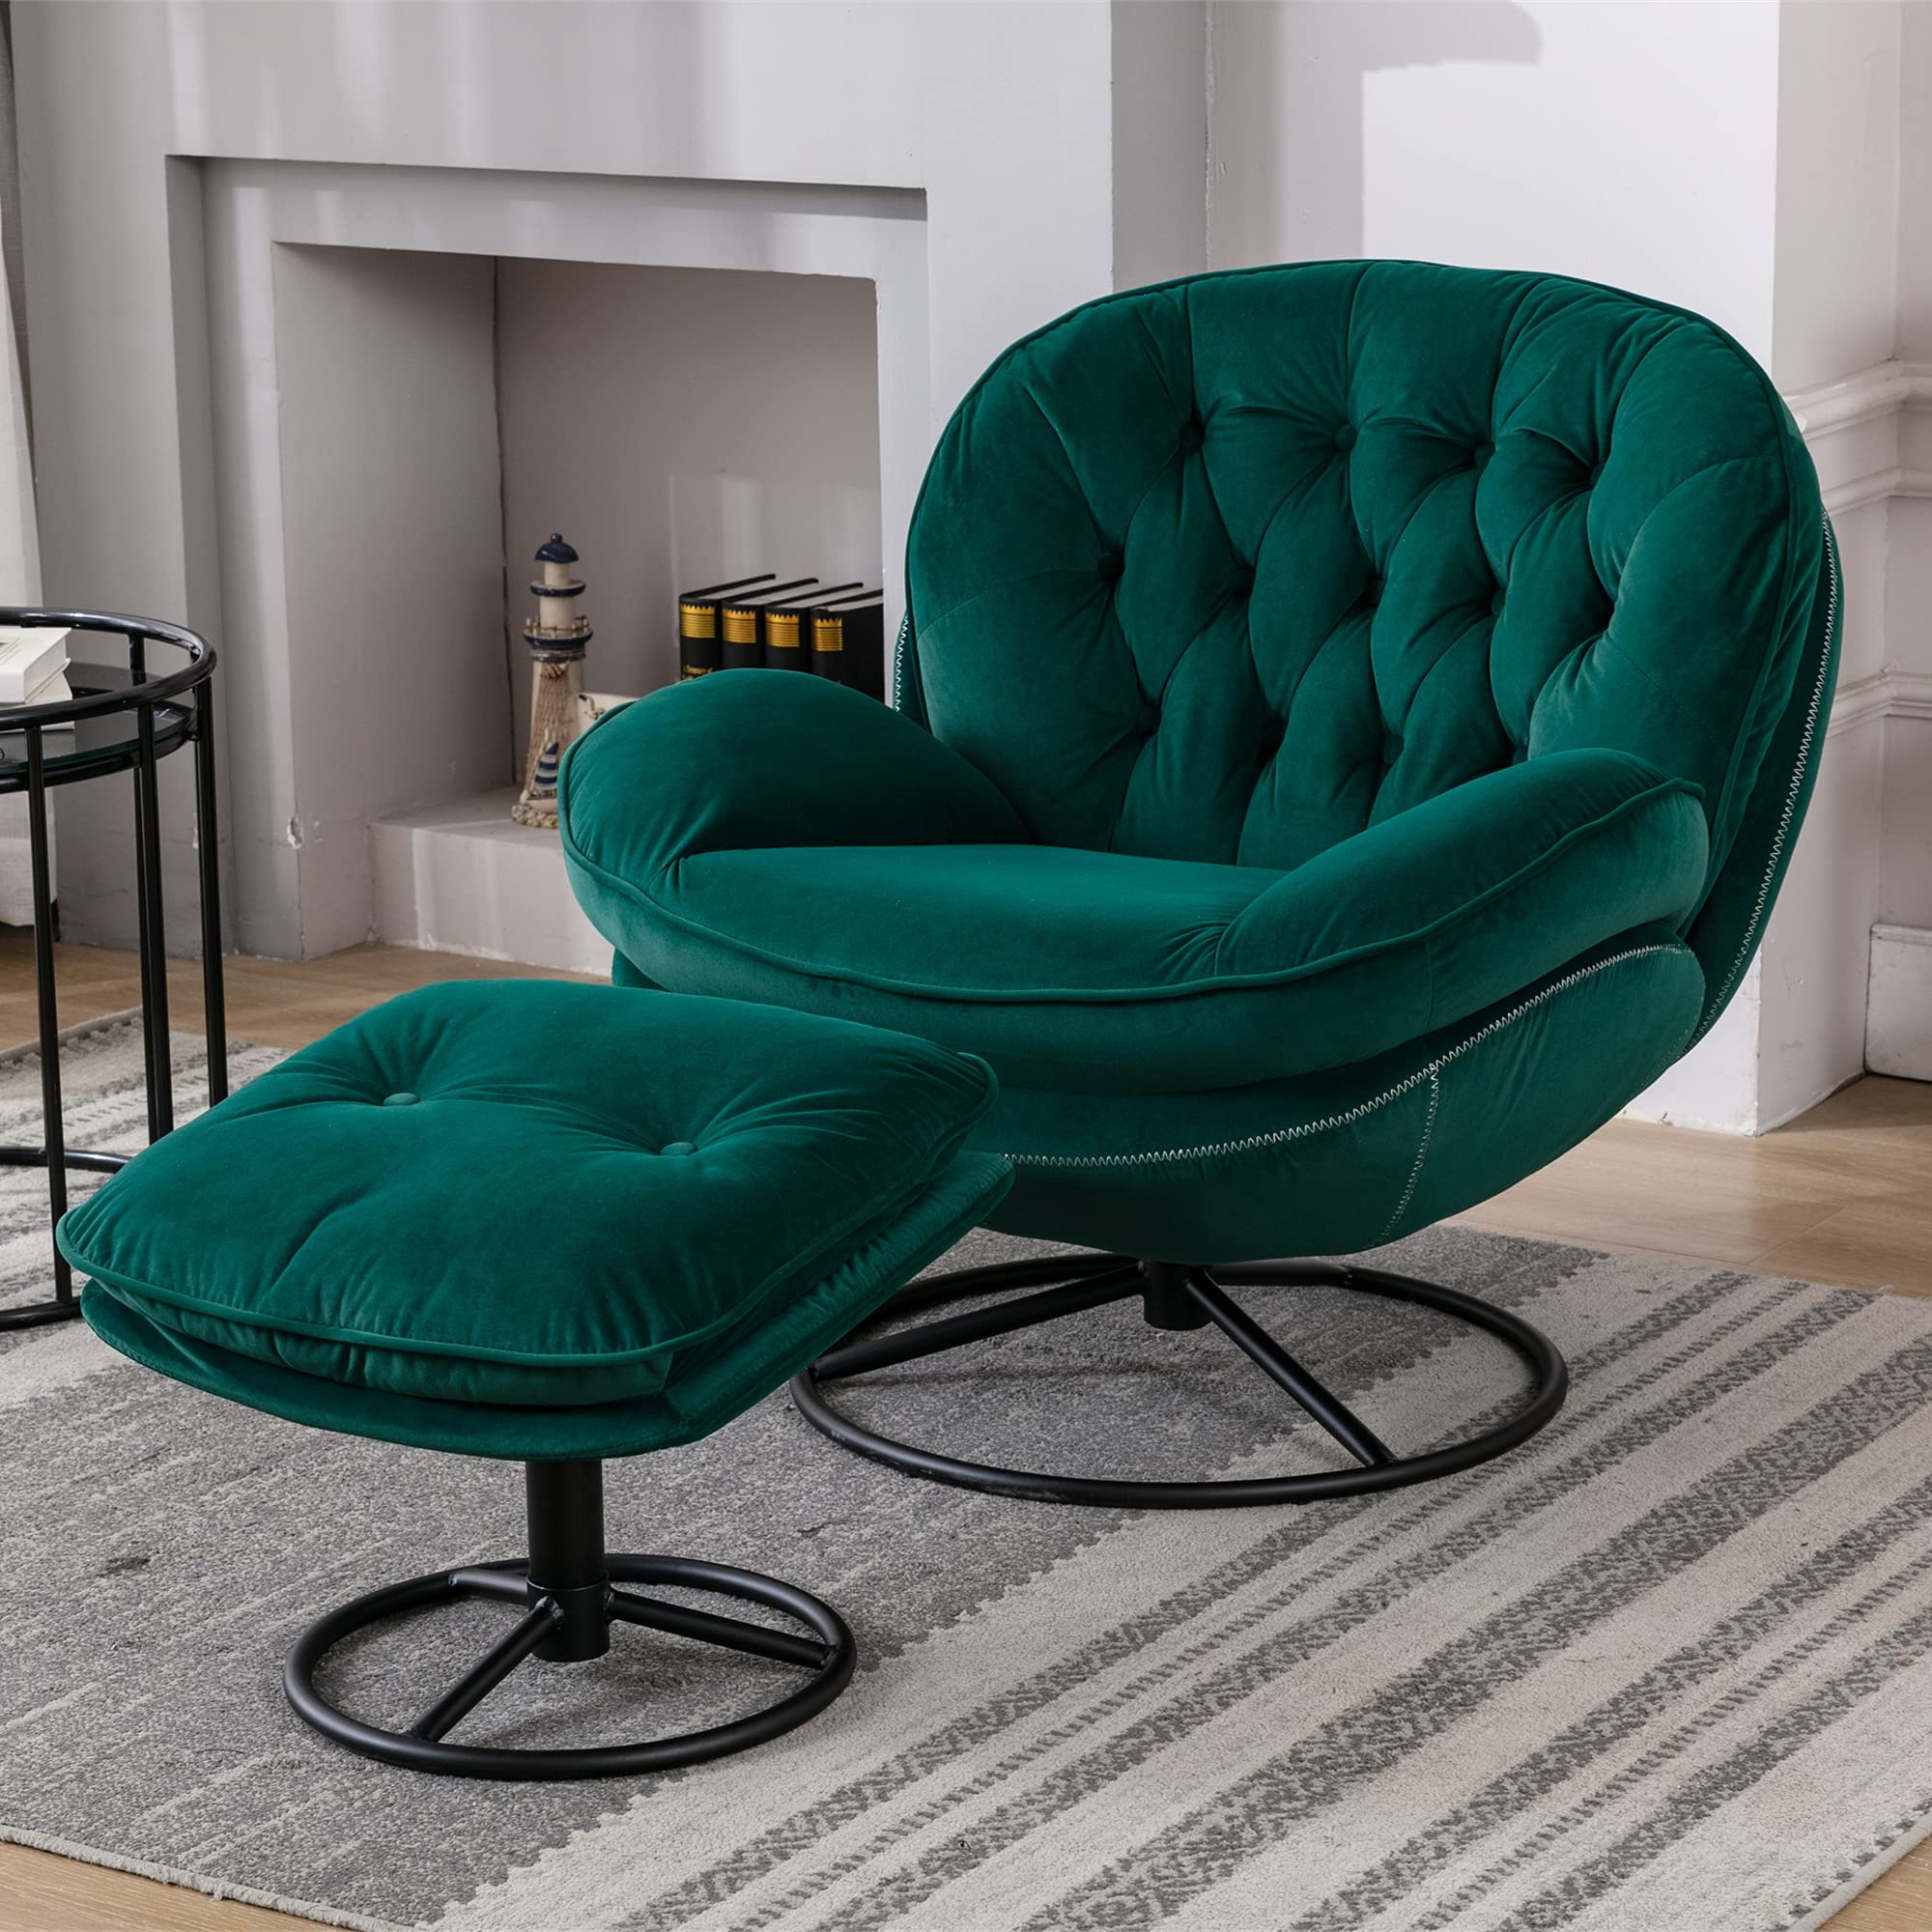 cNANXU Accent chair TV chair Living Room chair with Ottoman, Modern Velvet Lounge chair with comfy Armchair with Metal Legs, Swivel Lei